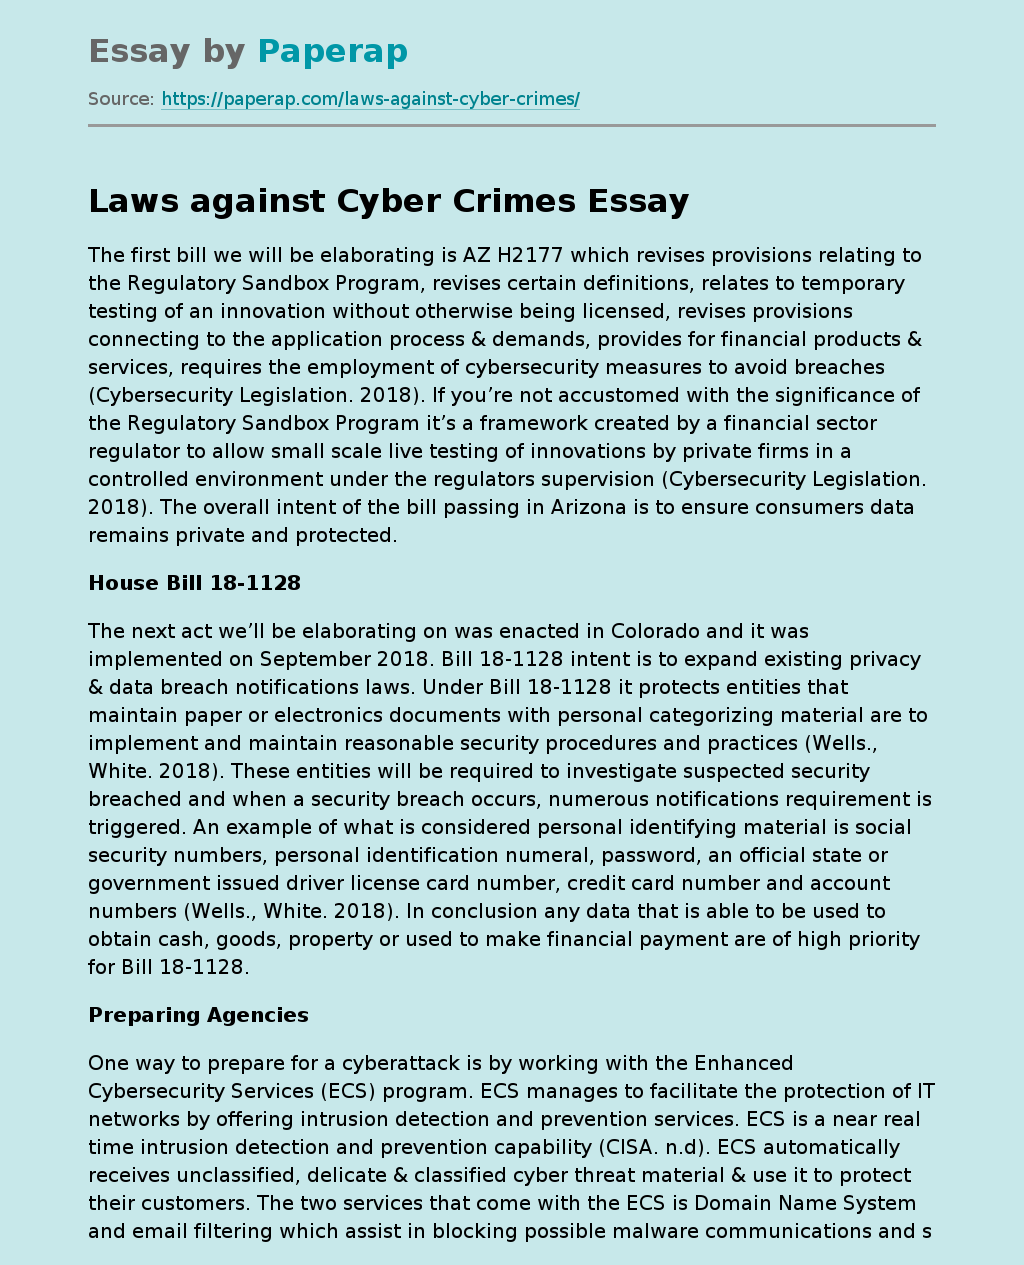 Laws against Cyber Crimes